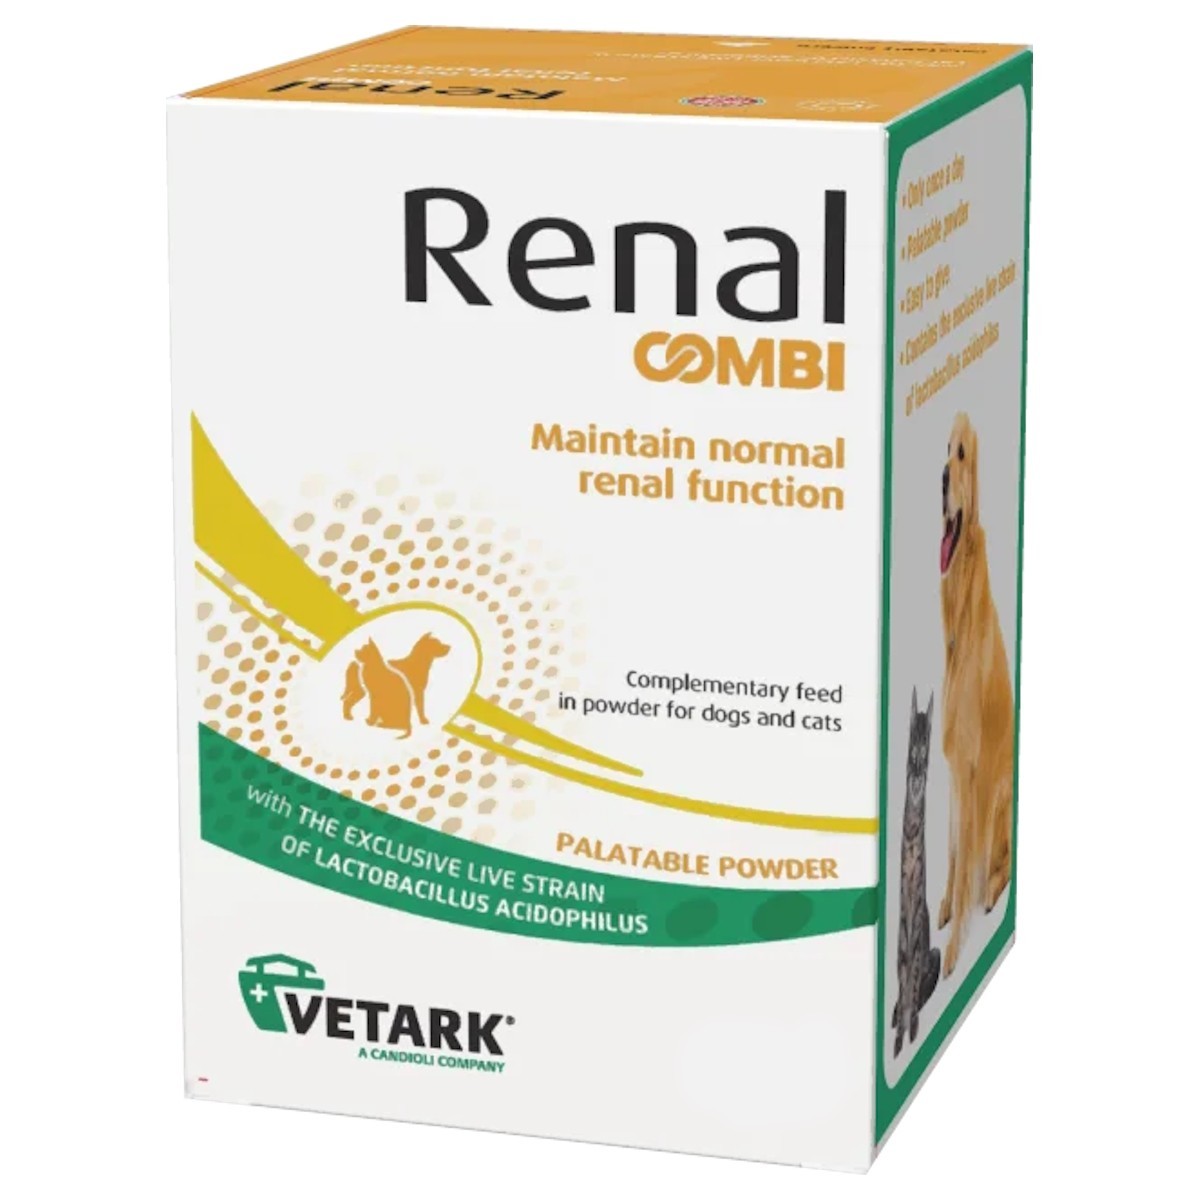 Renal Combi Powder Maintain Normal Renal Function For Cat & Dog 70g & 240g 